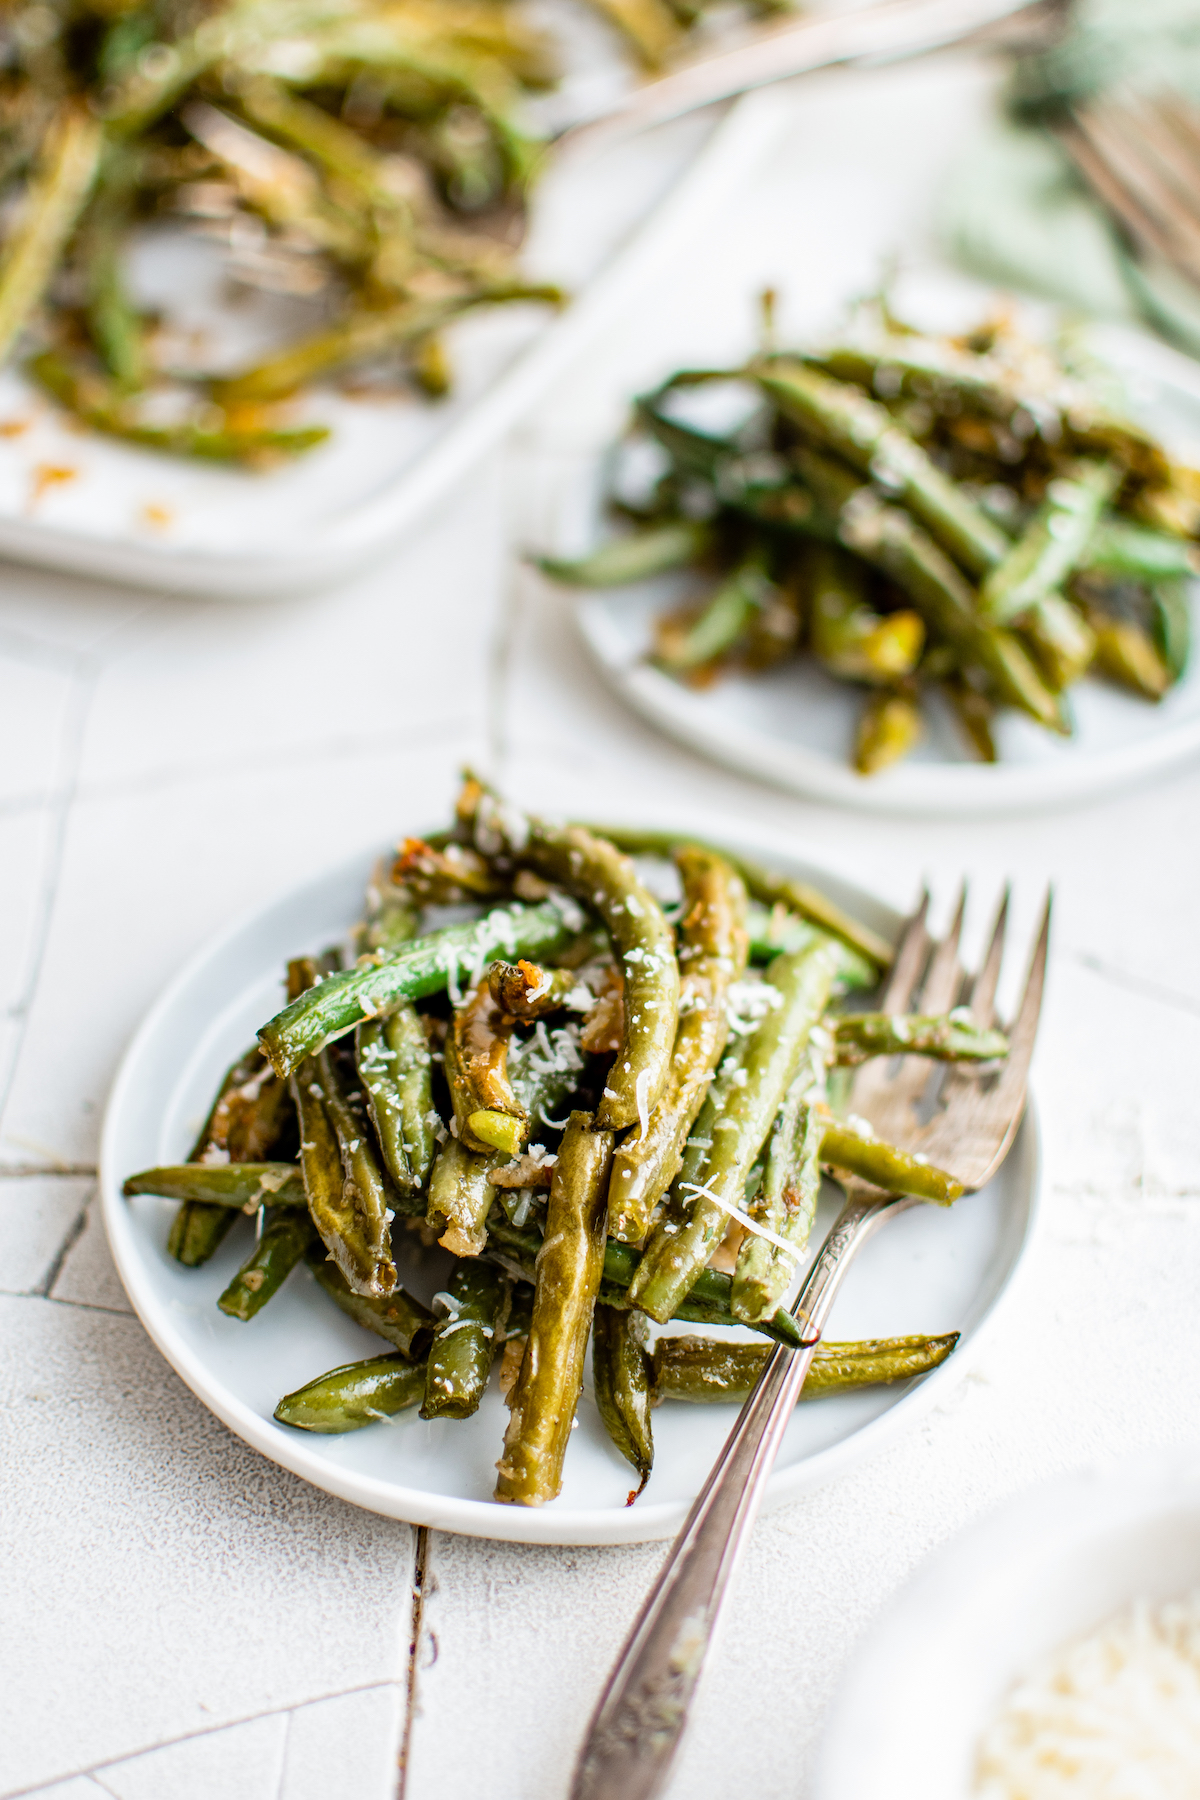 Two small white plates with servings of roasted green beans and forks. A larger platter of green beans is in the background of the shot.